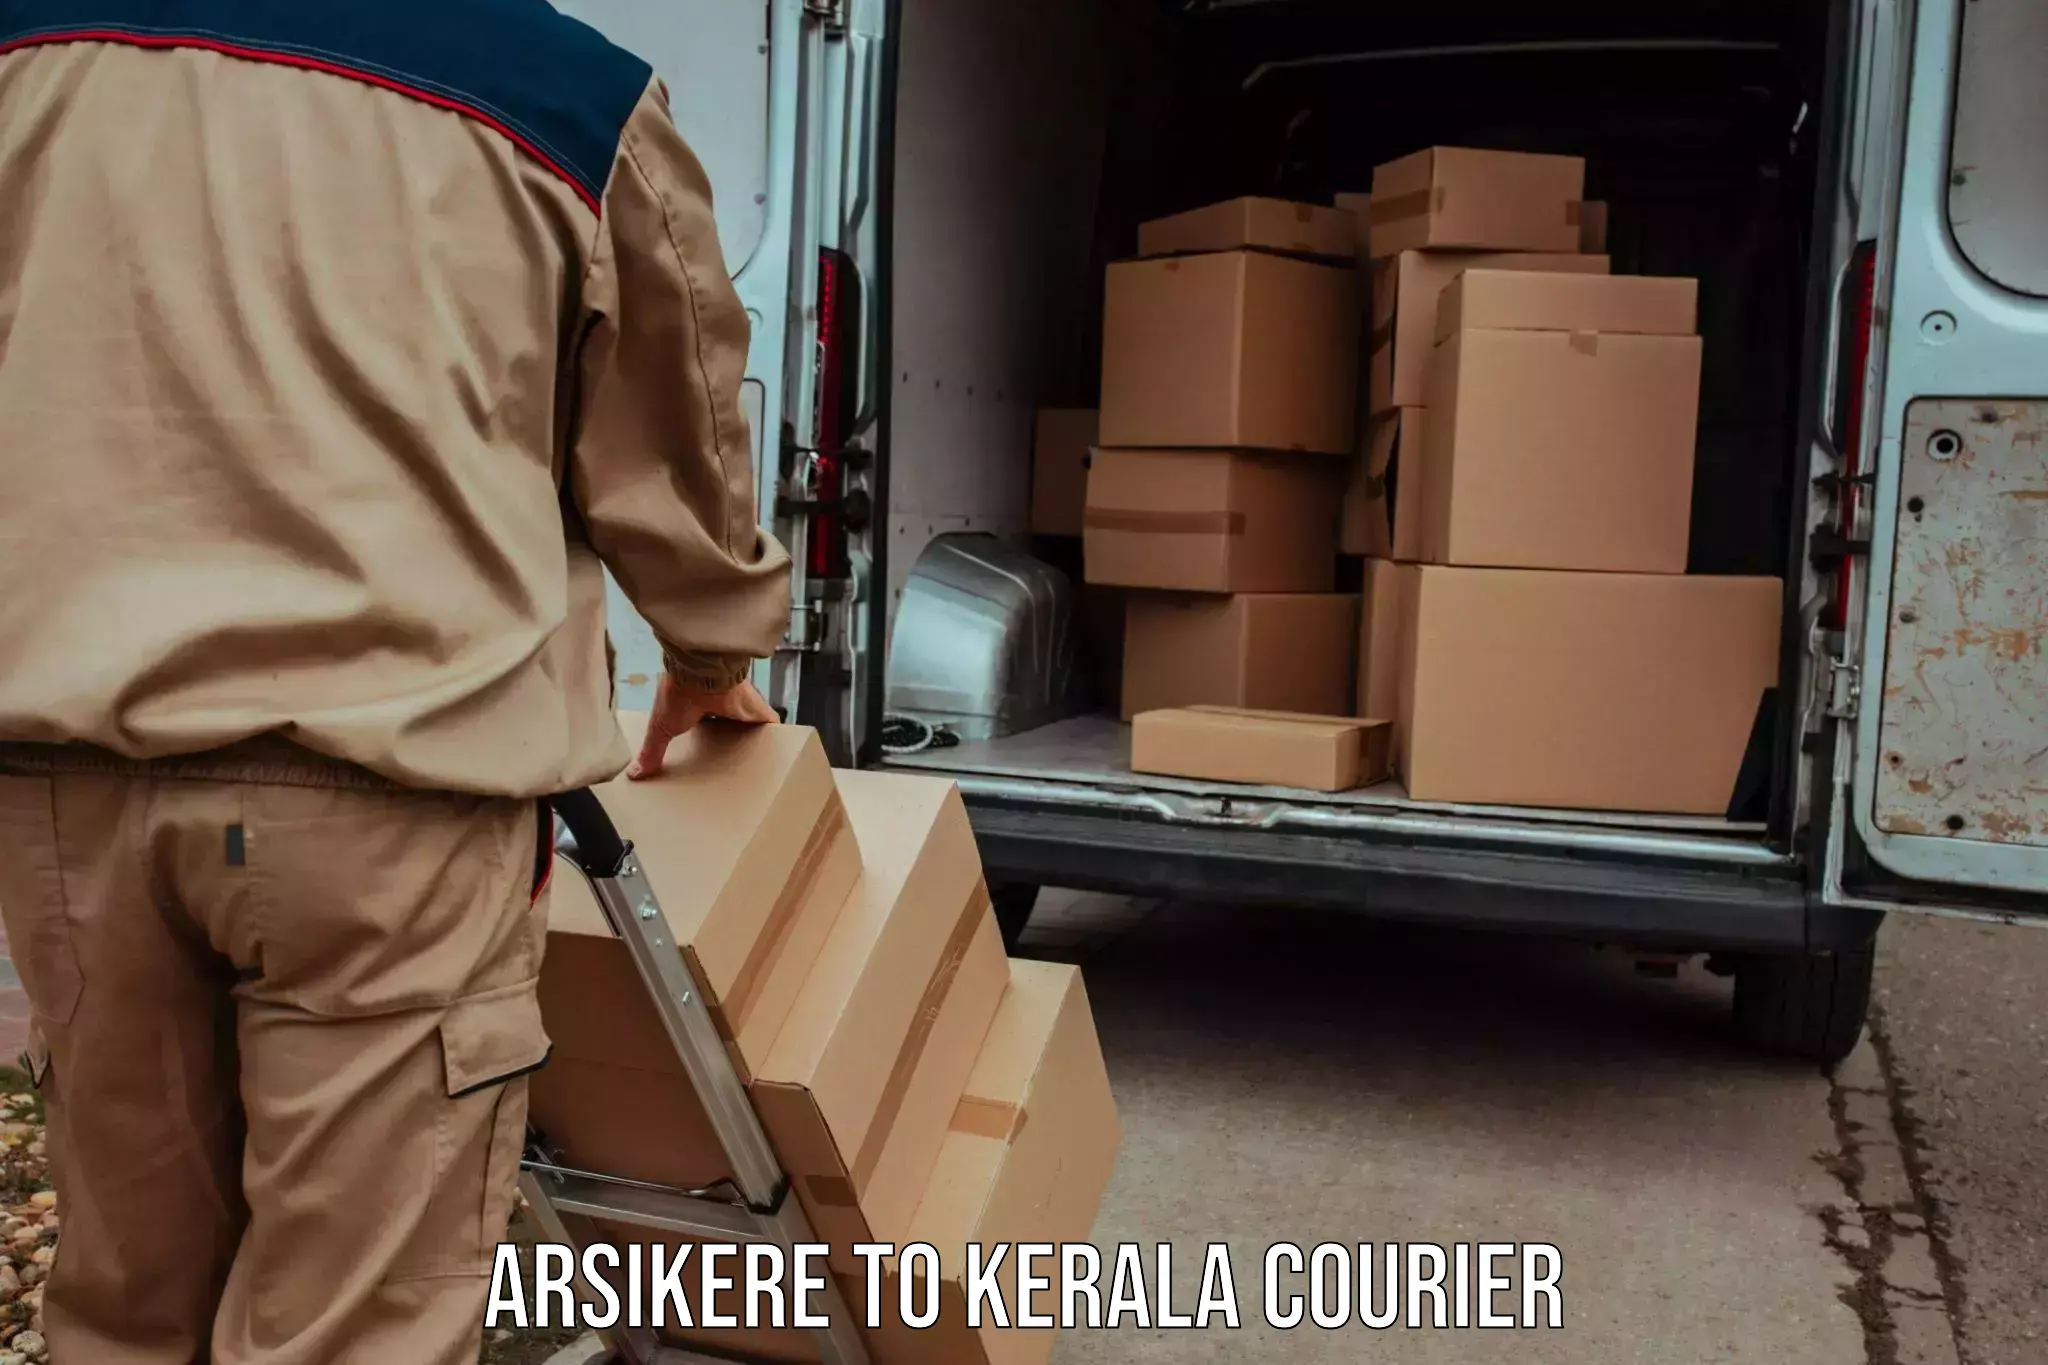 Professional parcel services Arsikere to Kerala